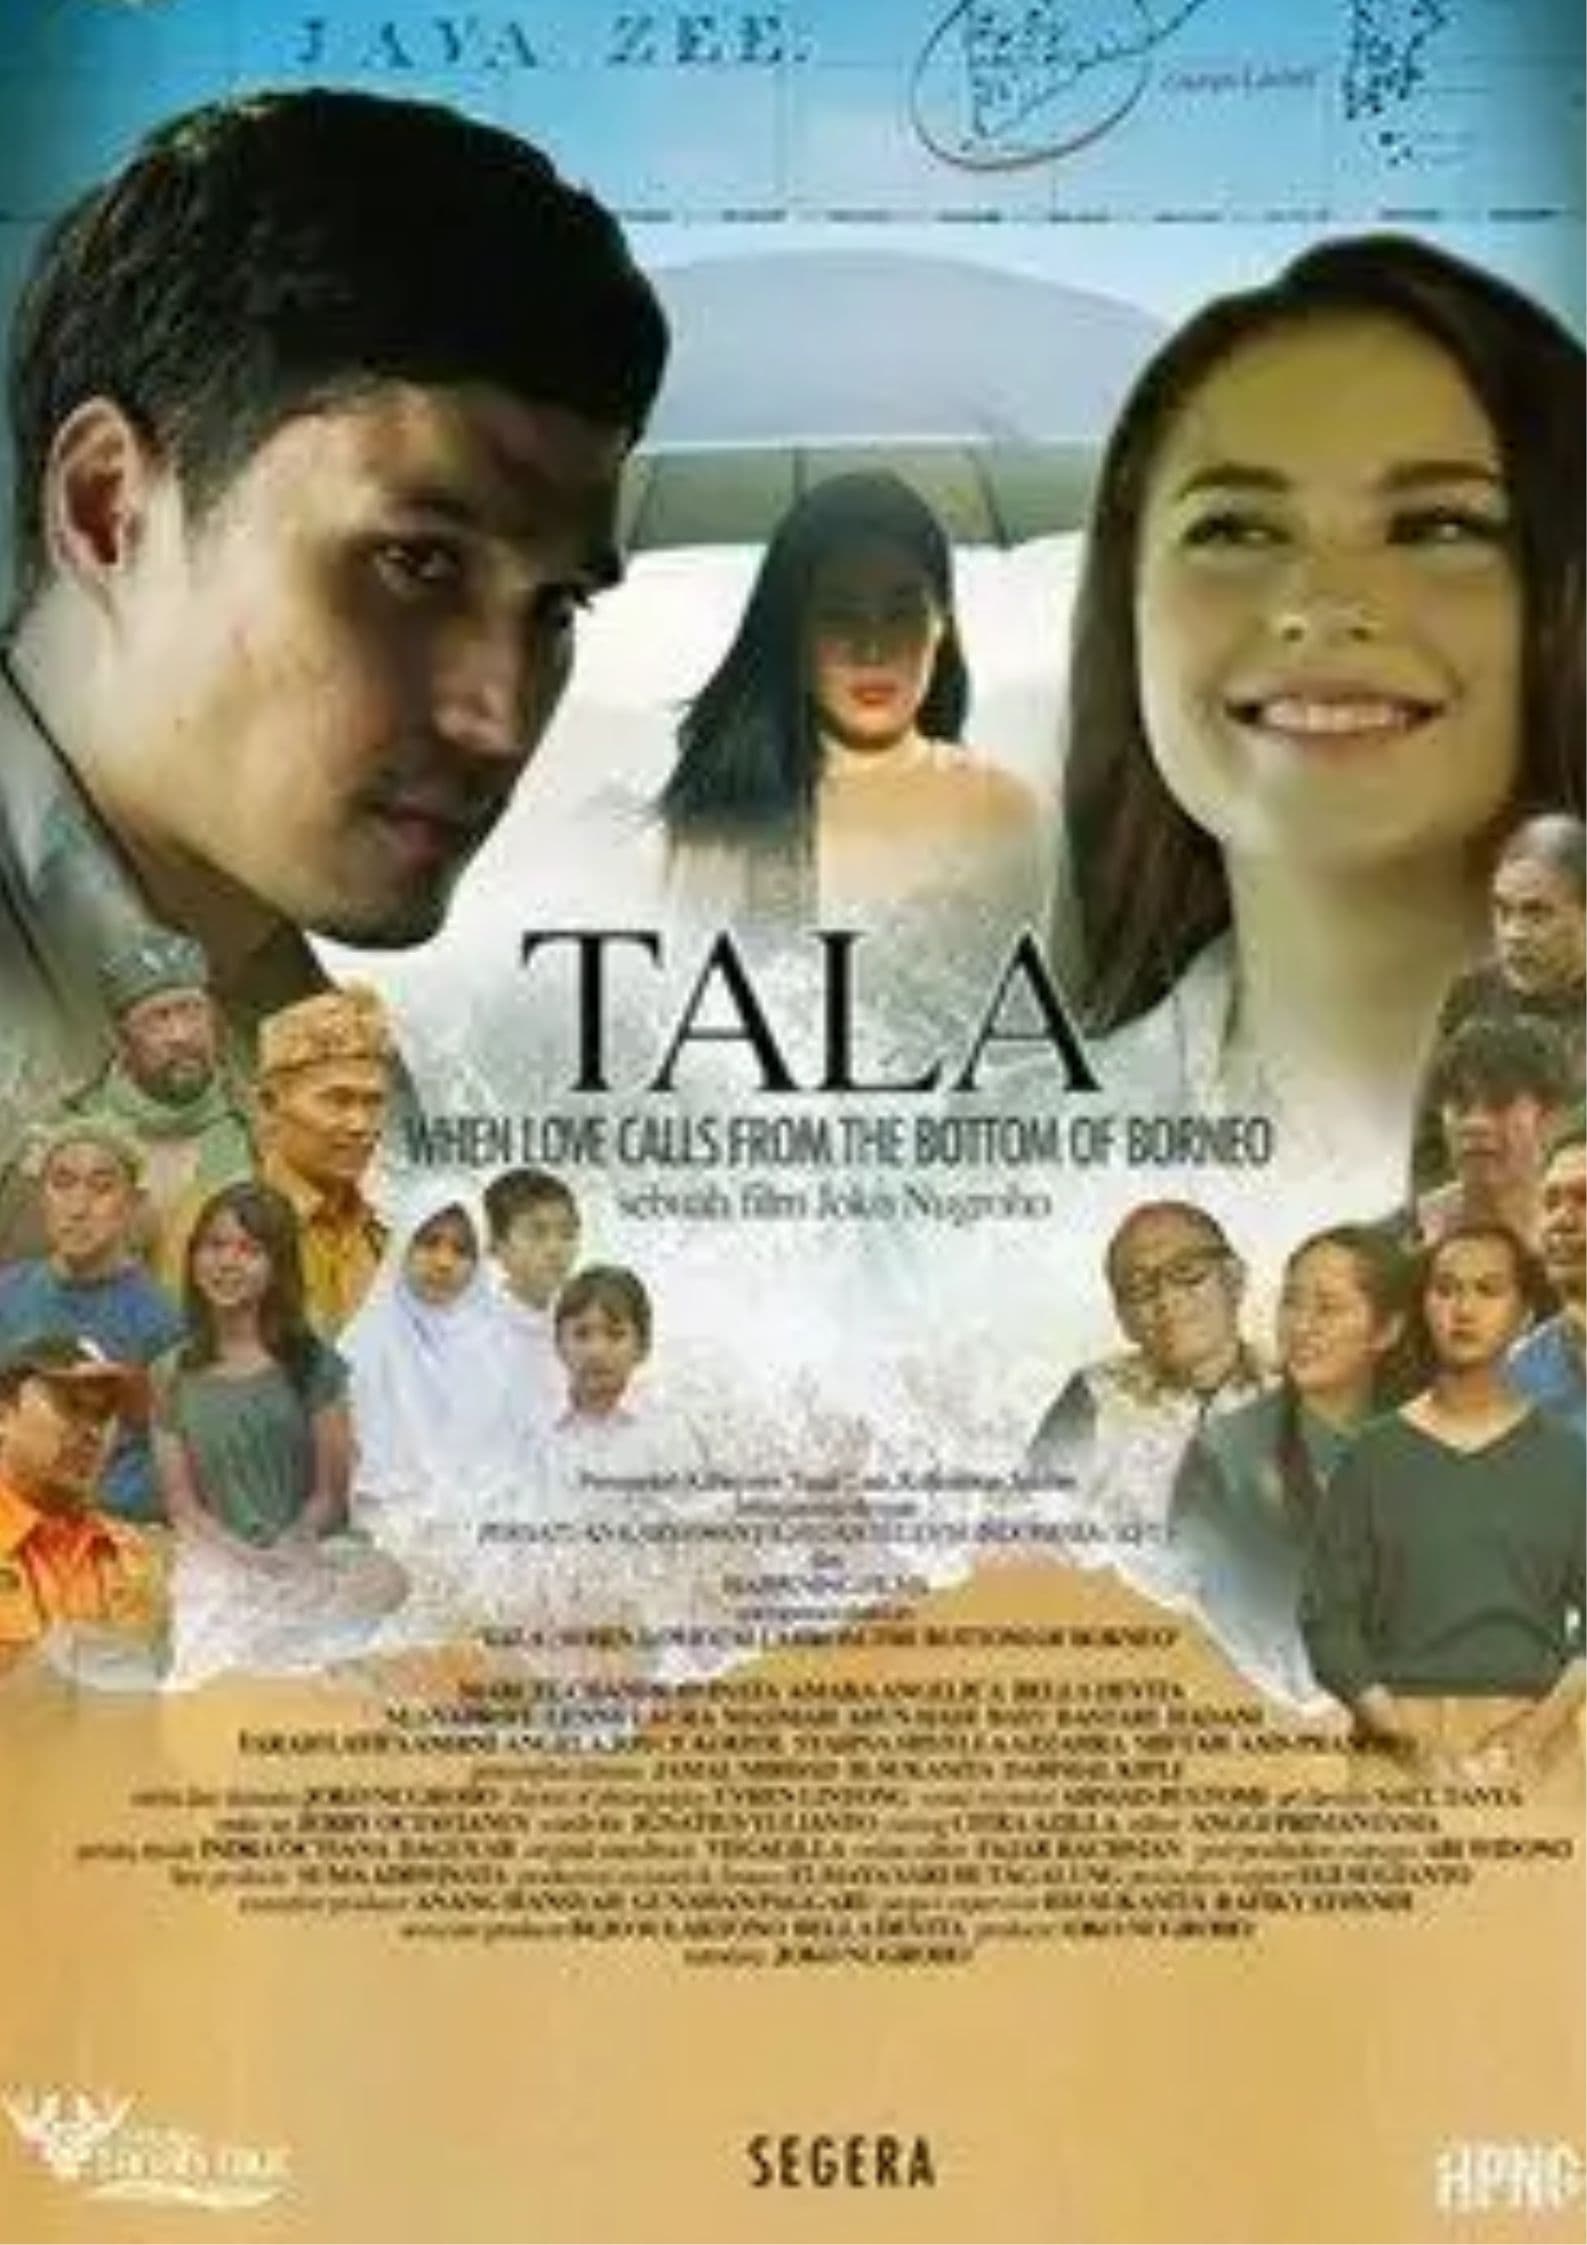 Tala: When Love Calls From the Bottom of Borneo